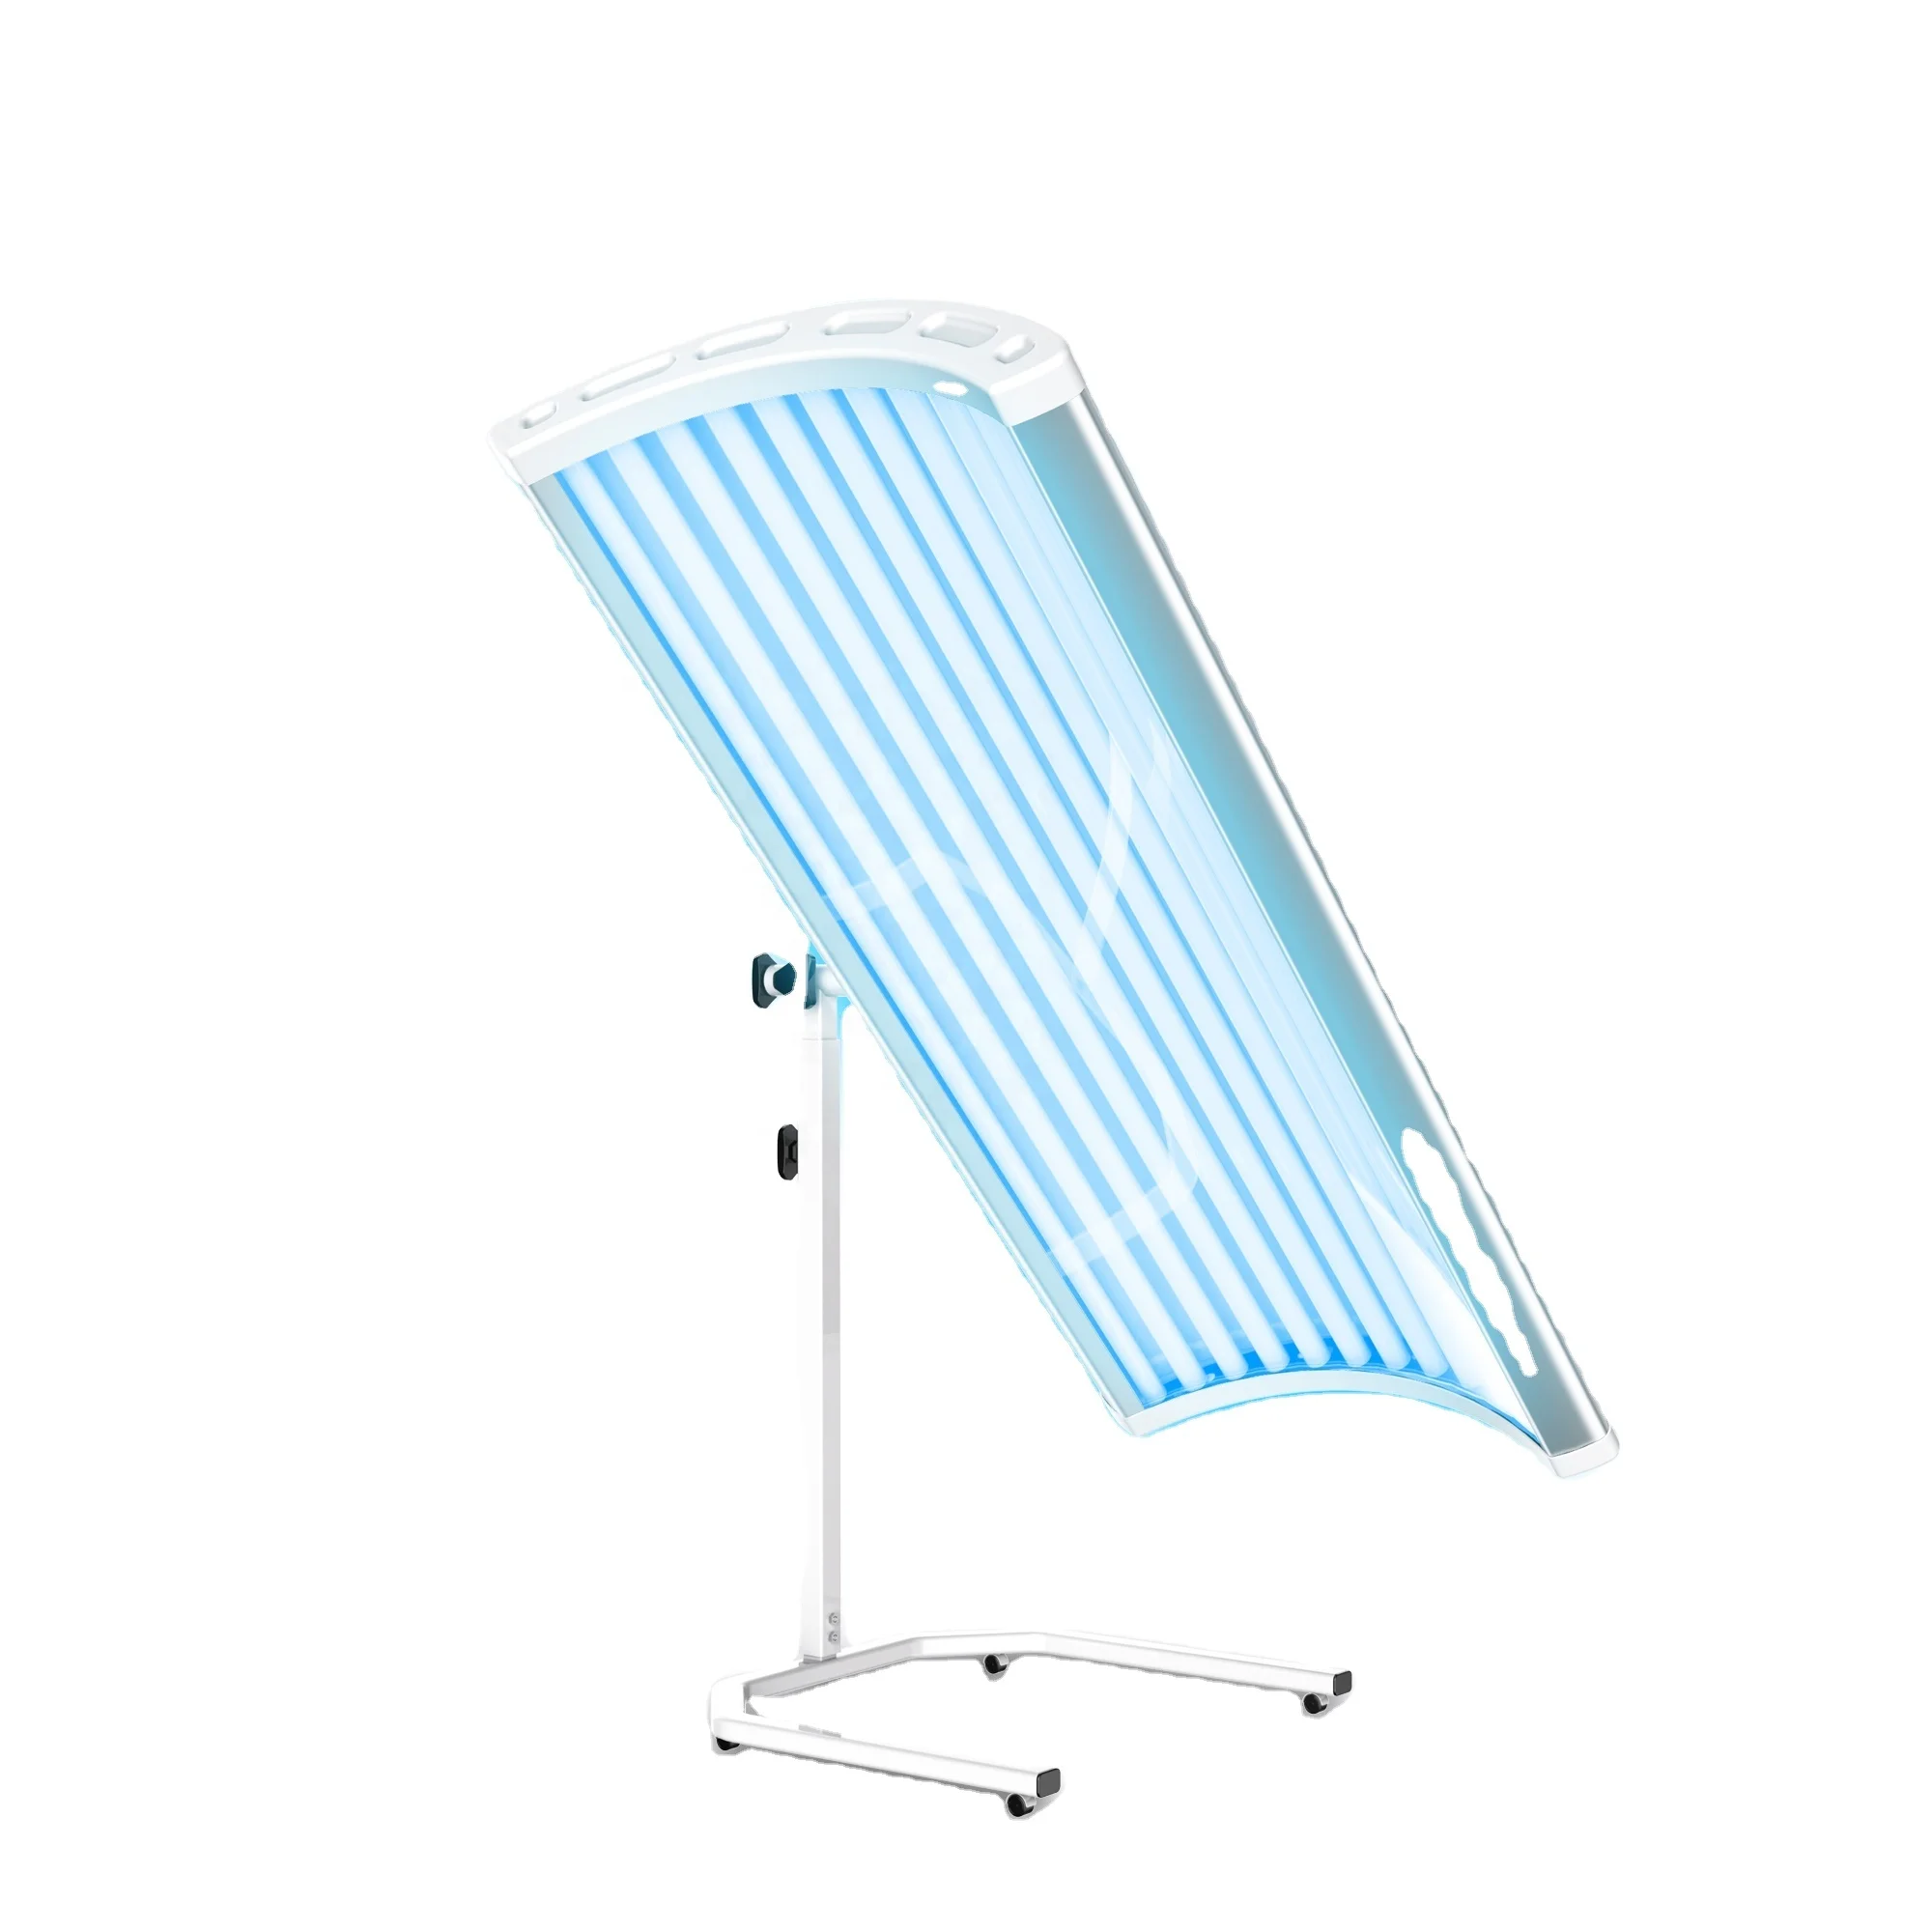 

Popular Sunshine W1-12 Household tanning bed 600W/800W/1000W/1200W solarium bed for tanning bed canopy at home